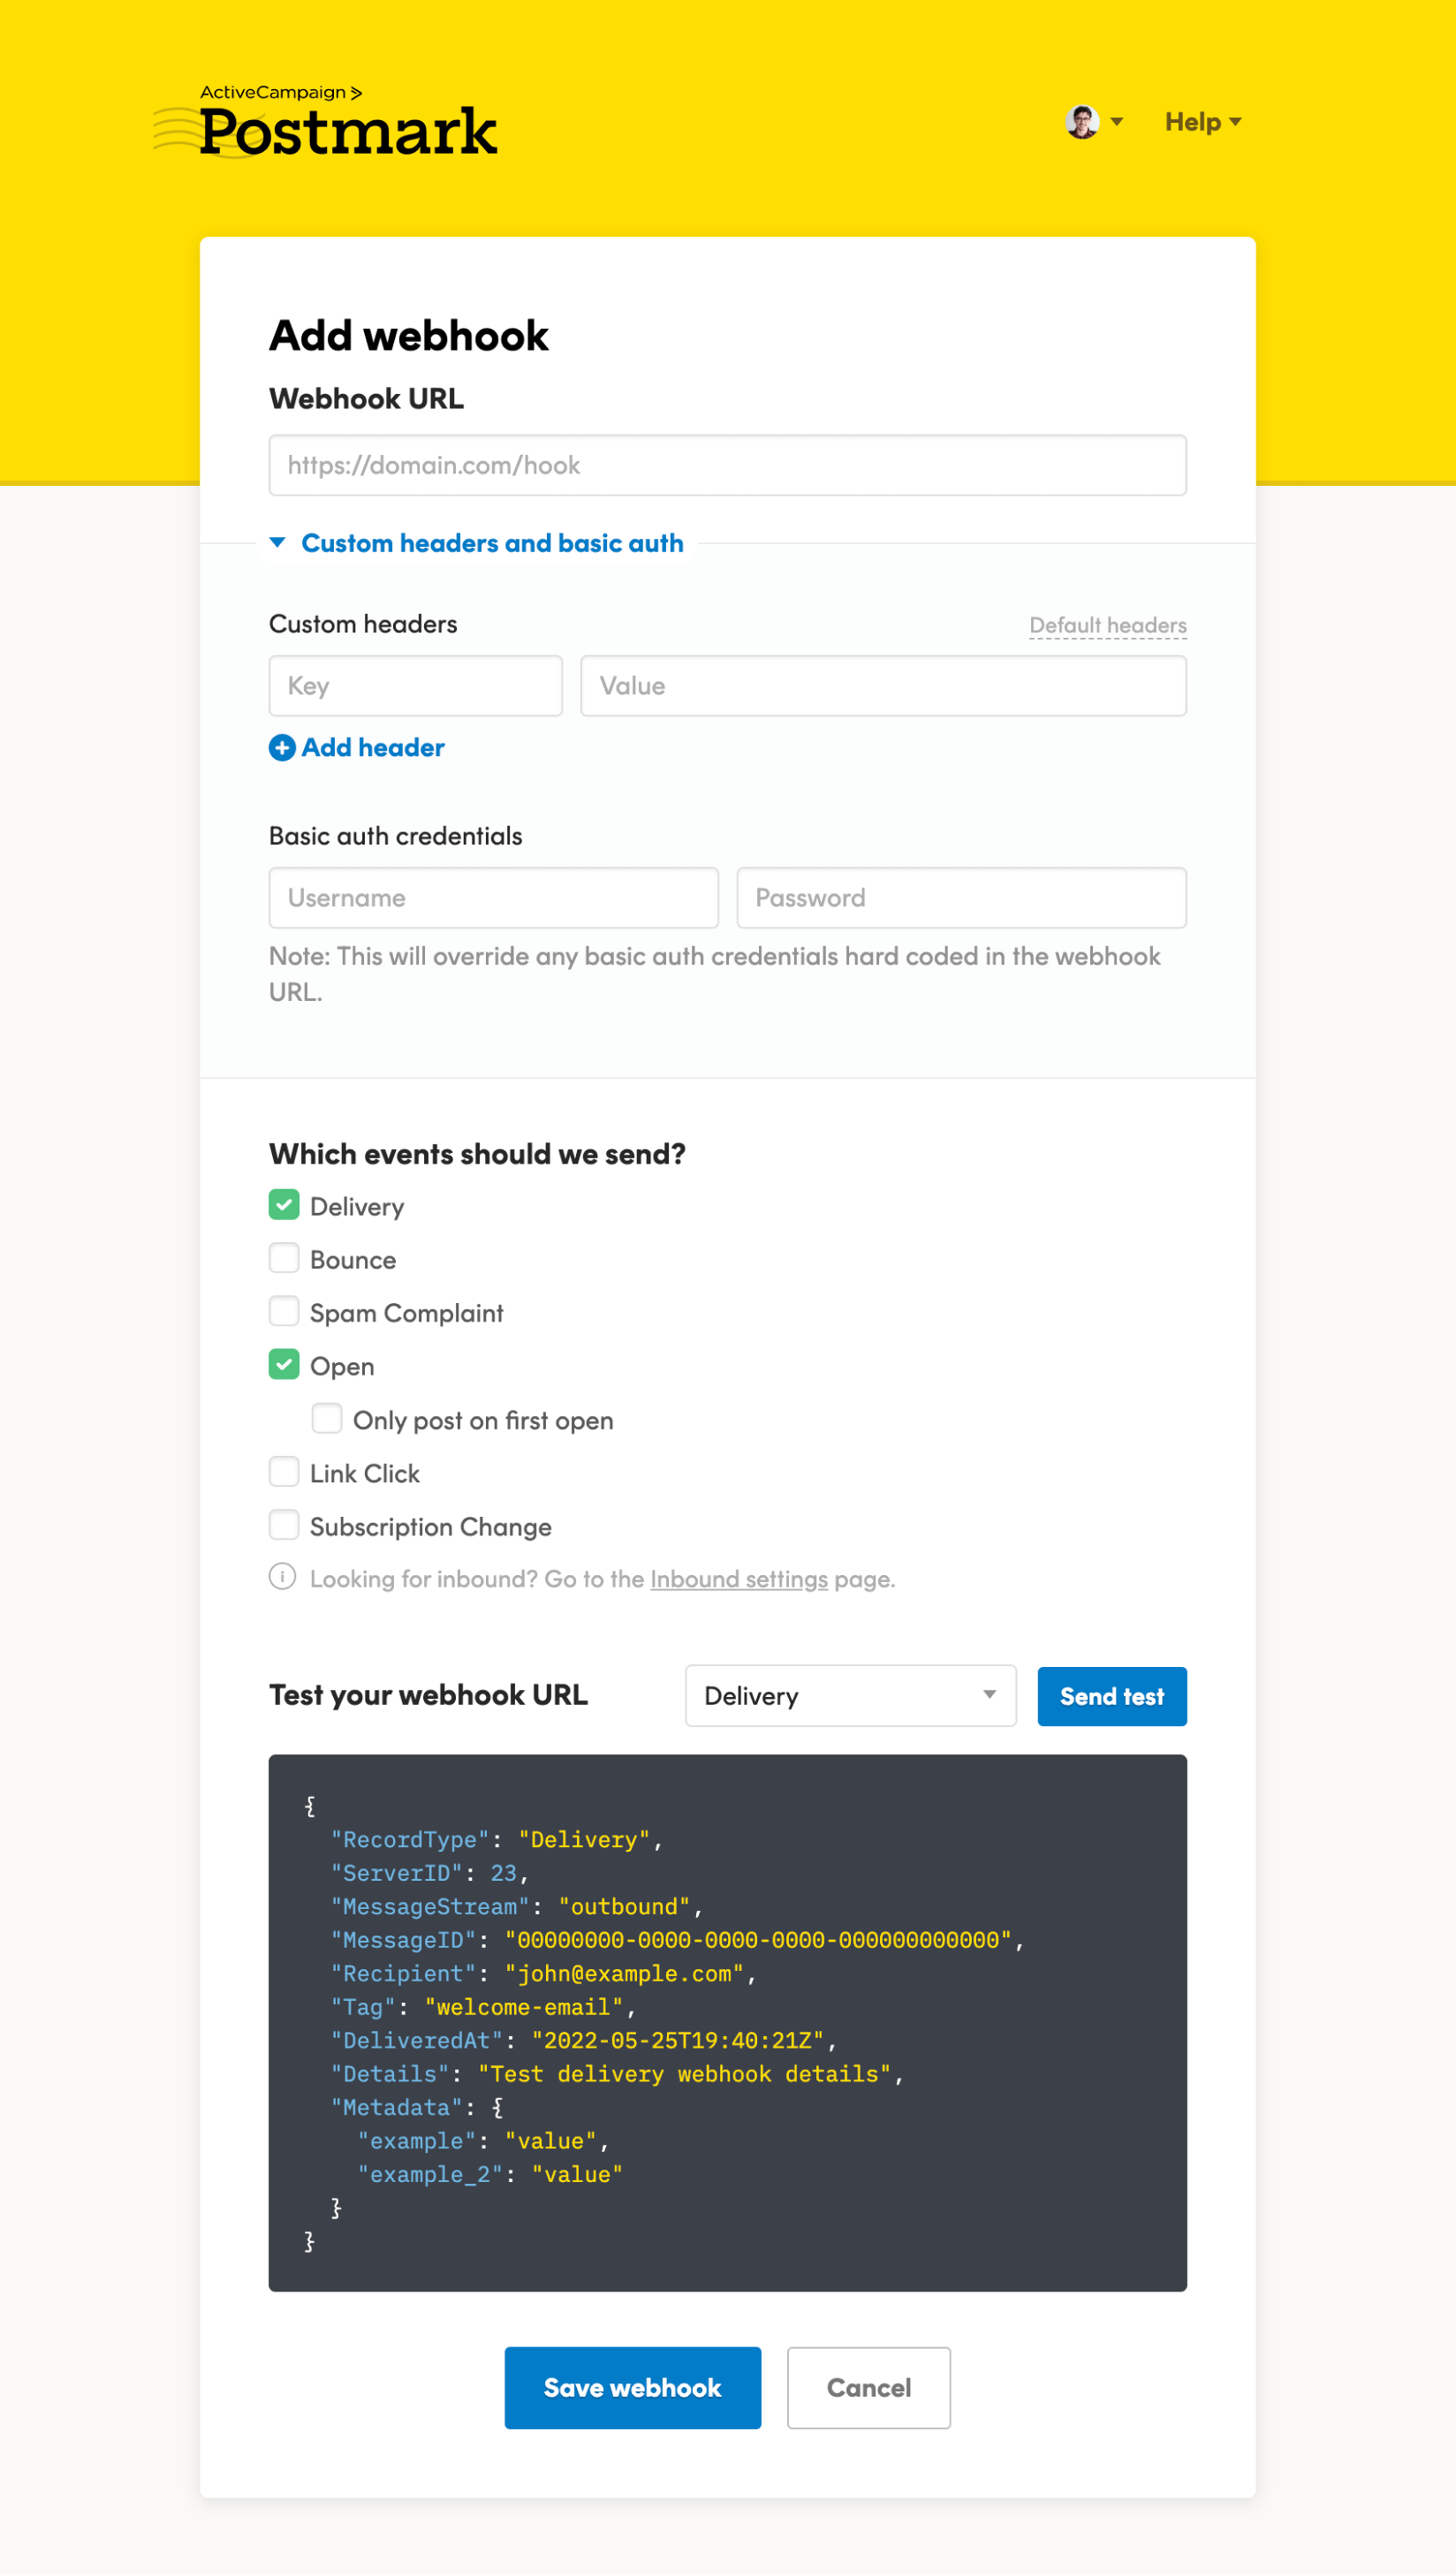 Screenshot of the page to add a new modular webhook